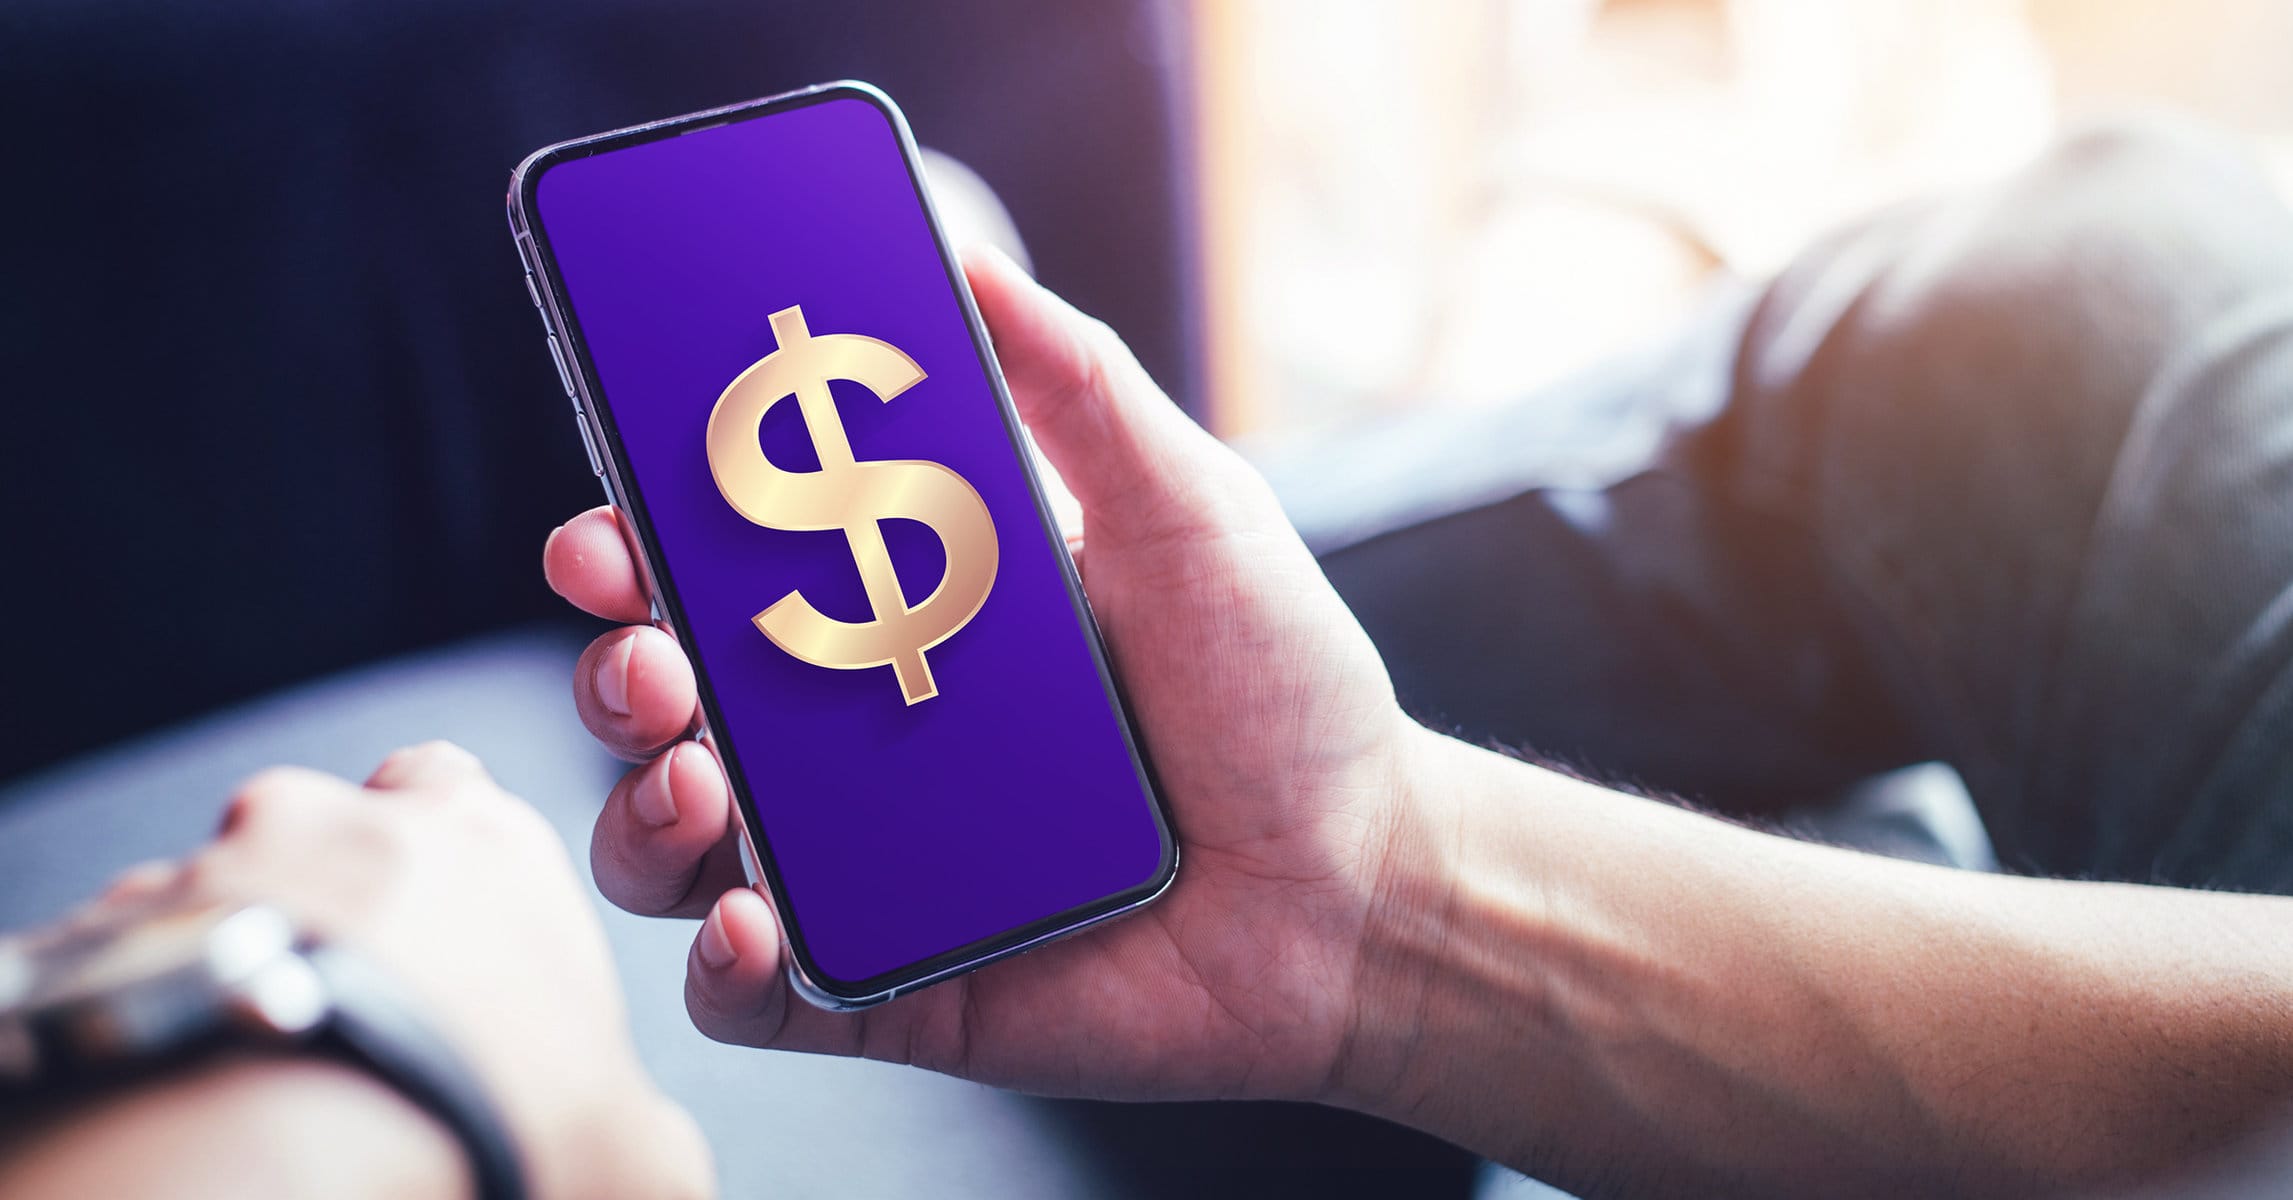 How To Make Money With A Smartphone